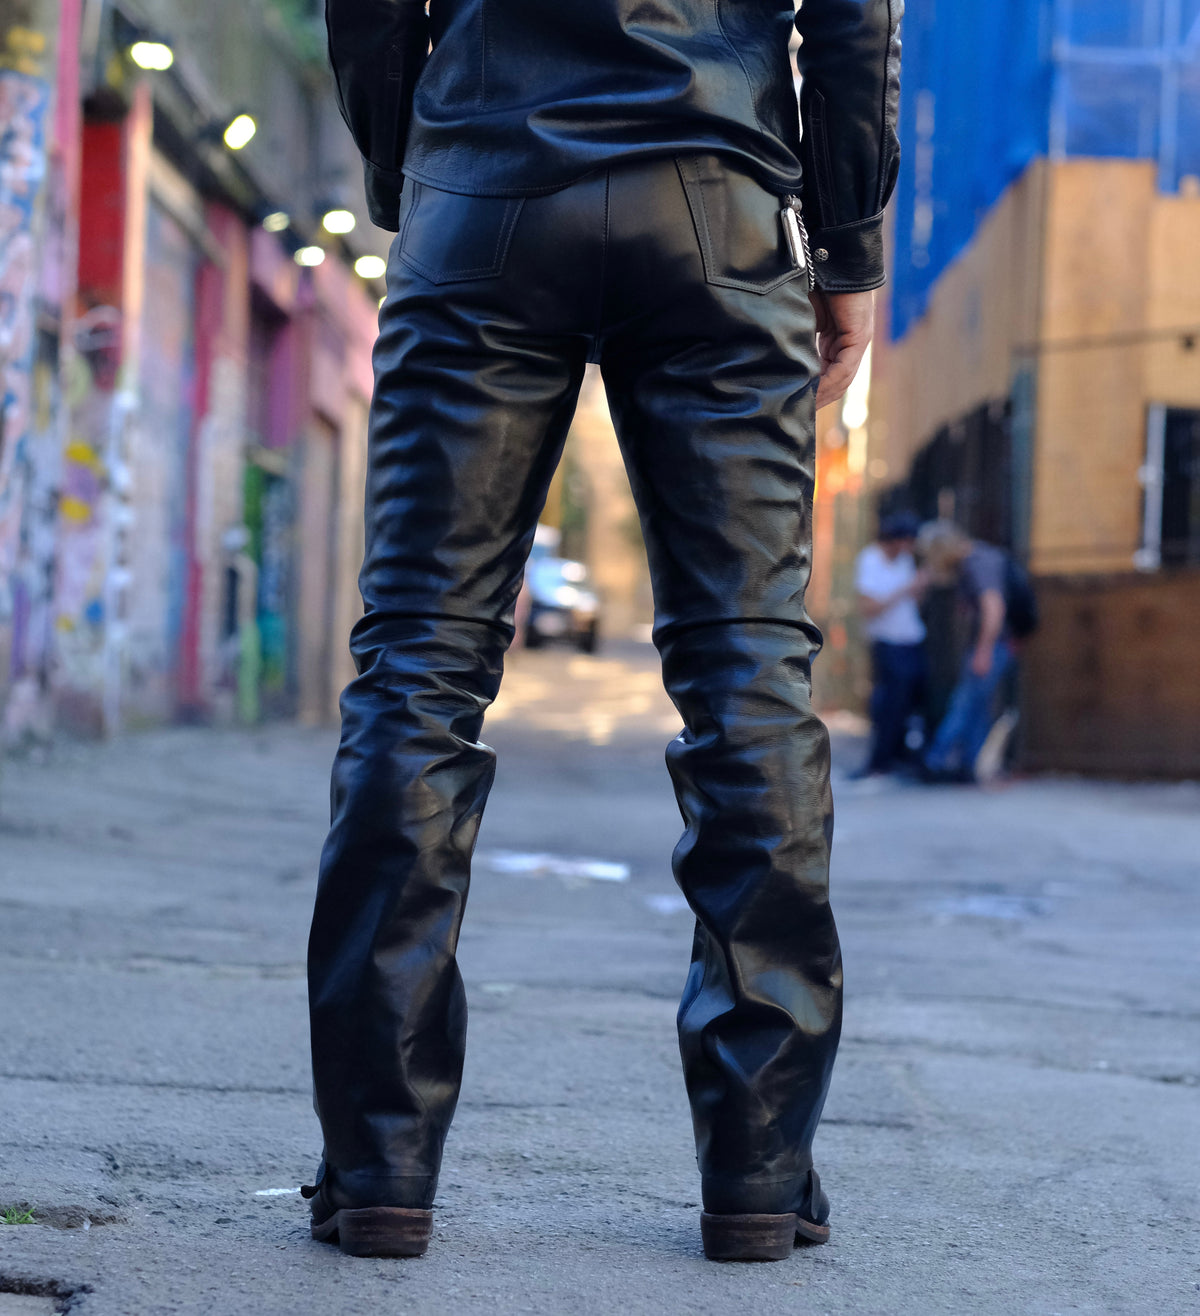 The Shop Vancouver 1mm Teacore Horsehide Leather Pants